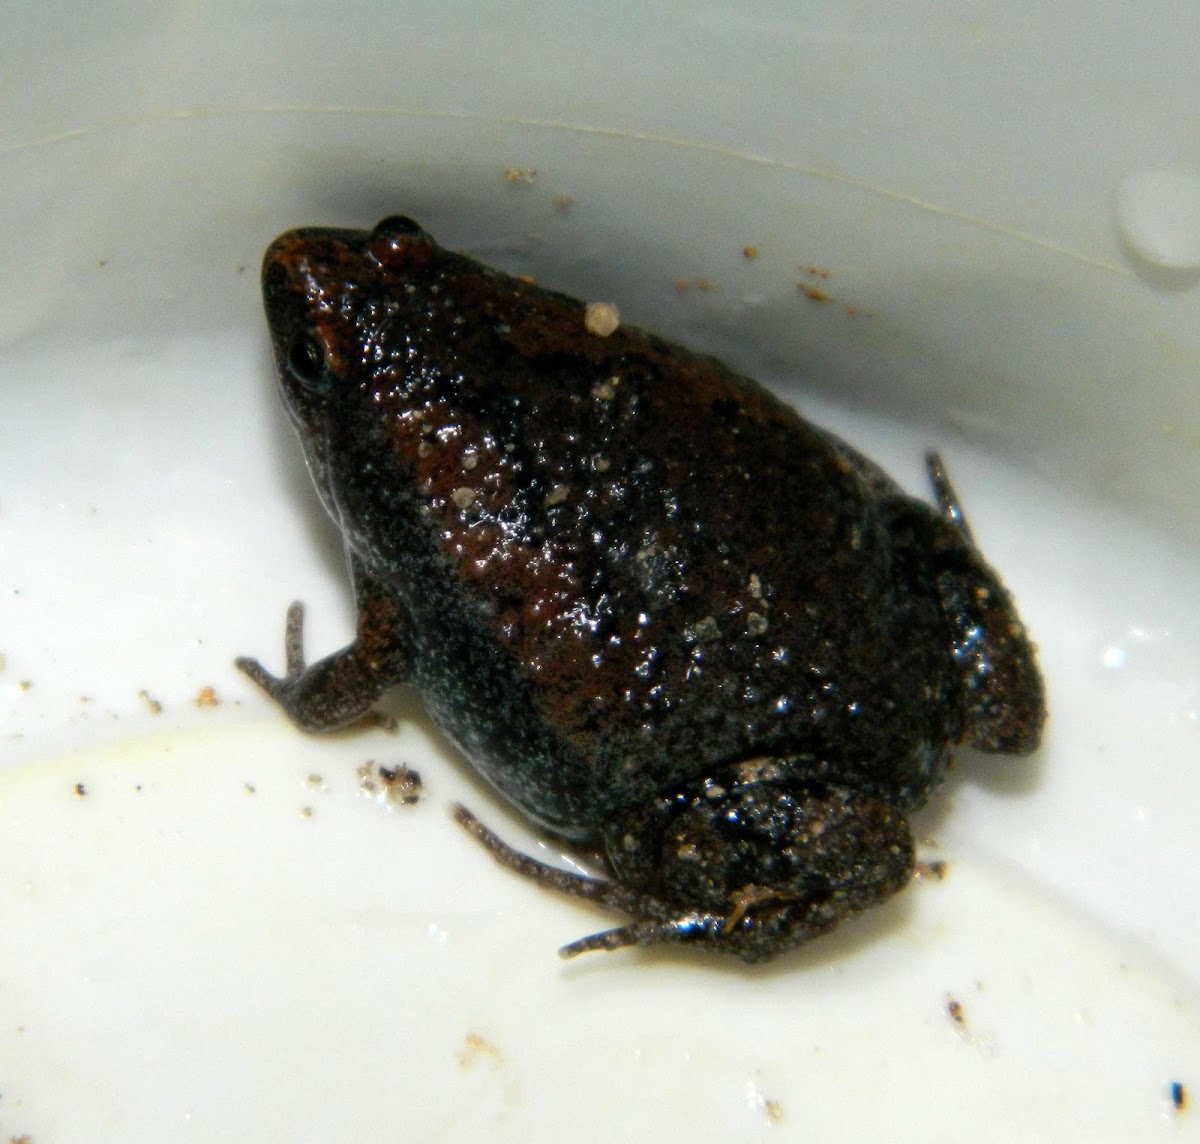 Eastern Narrow-Mouthed Frog